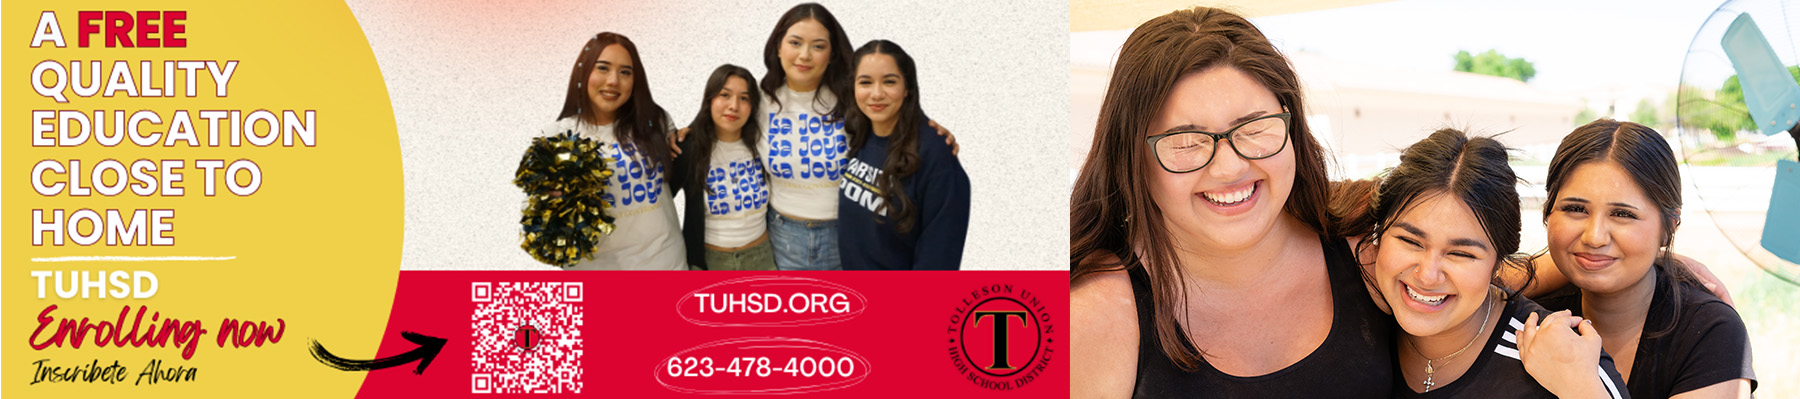 A free quality education close to home - TUHSD Enrolling now | Inscribete Ahora - tuhsd.org - 623-478-4000 | Three women smiling for the camera